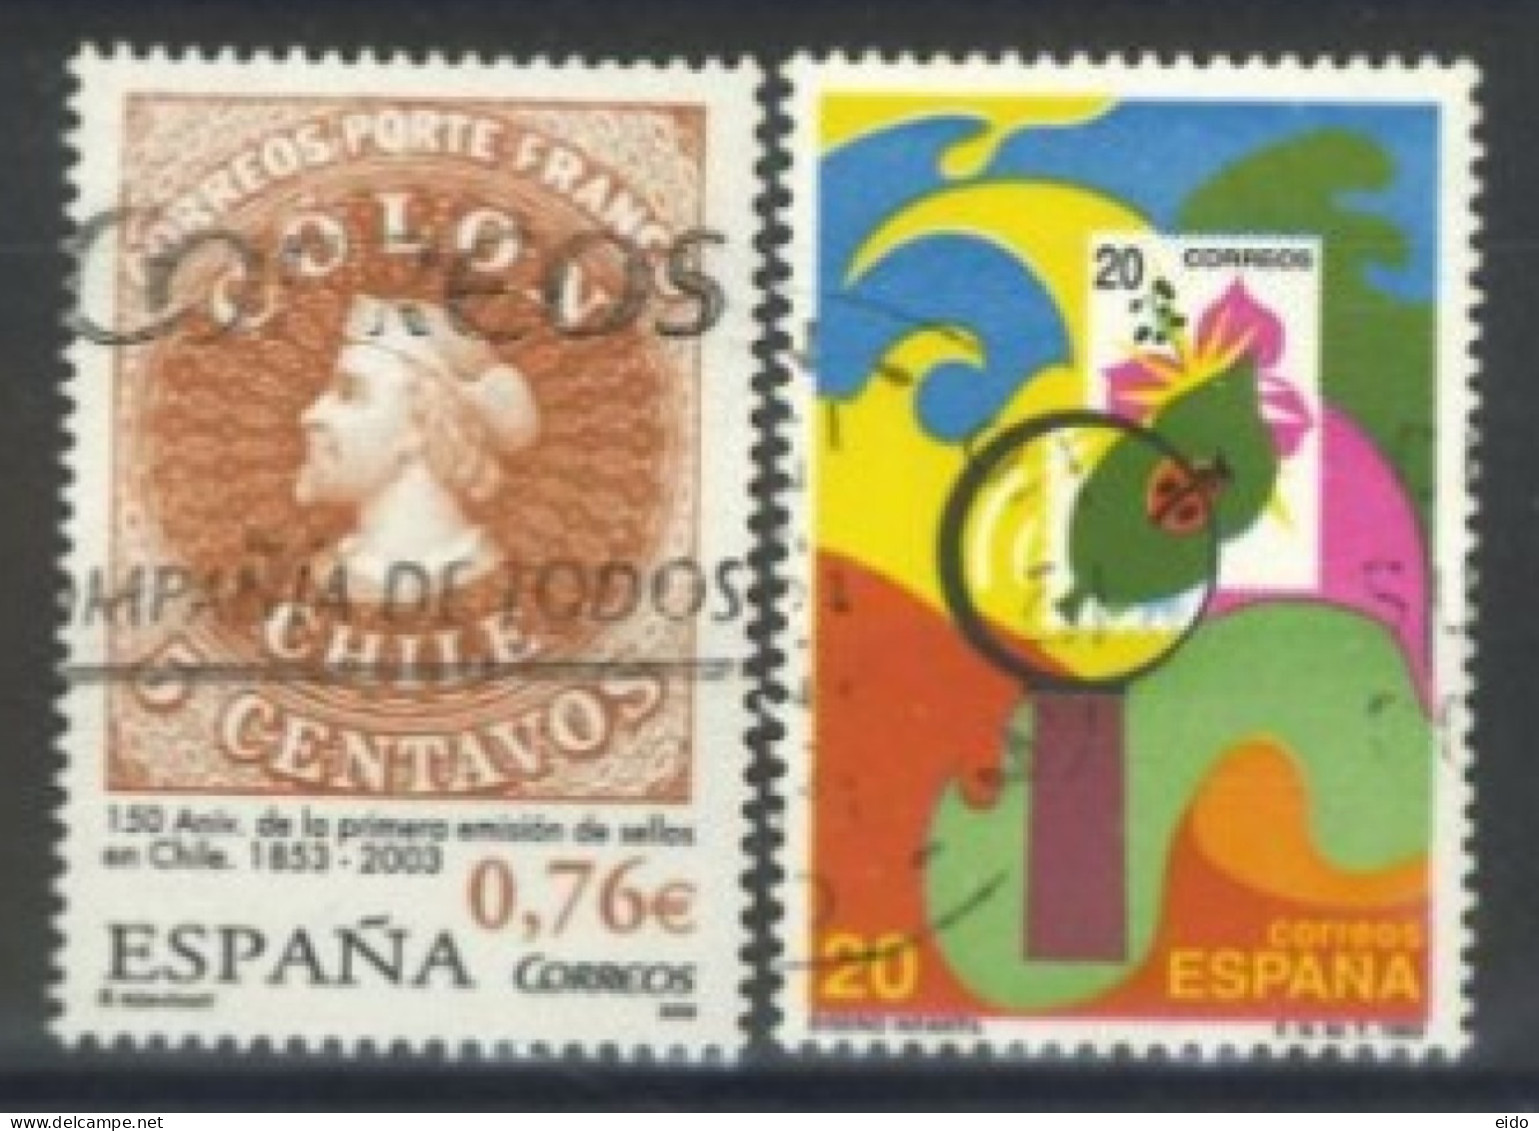 SPAIN,1989/2003, STAMP COLLECTING & CHILEAN POSTAGE STAMPS SET OF 2, # 2592, 3227, USED. - Gebraucht